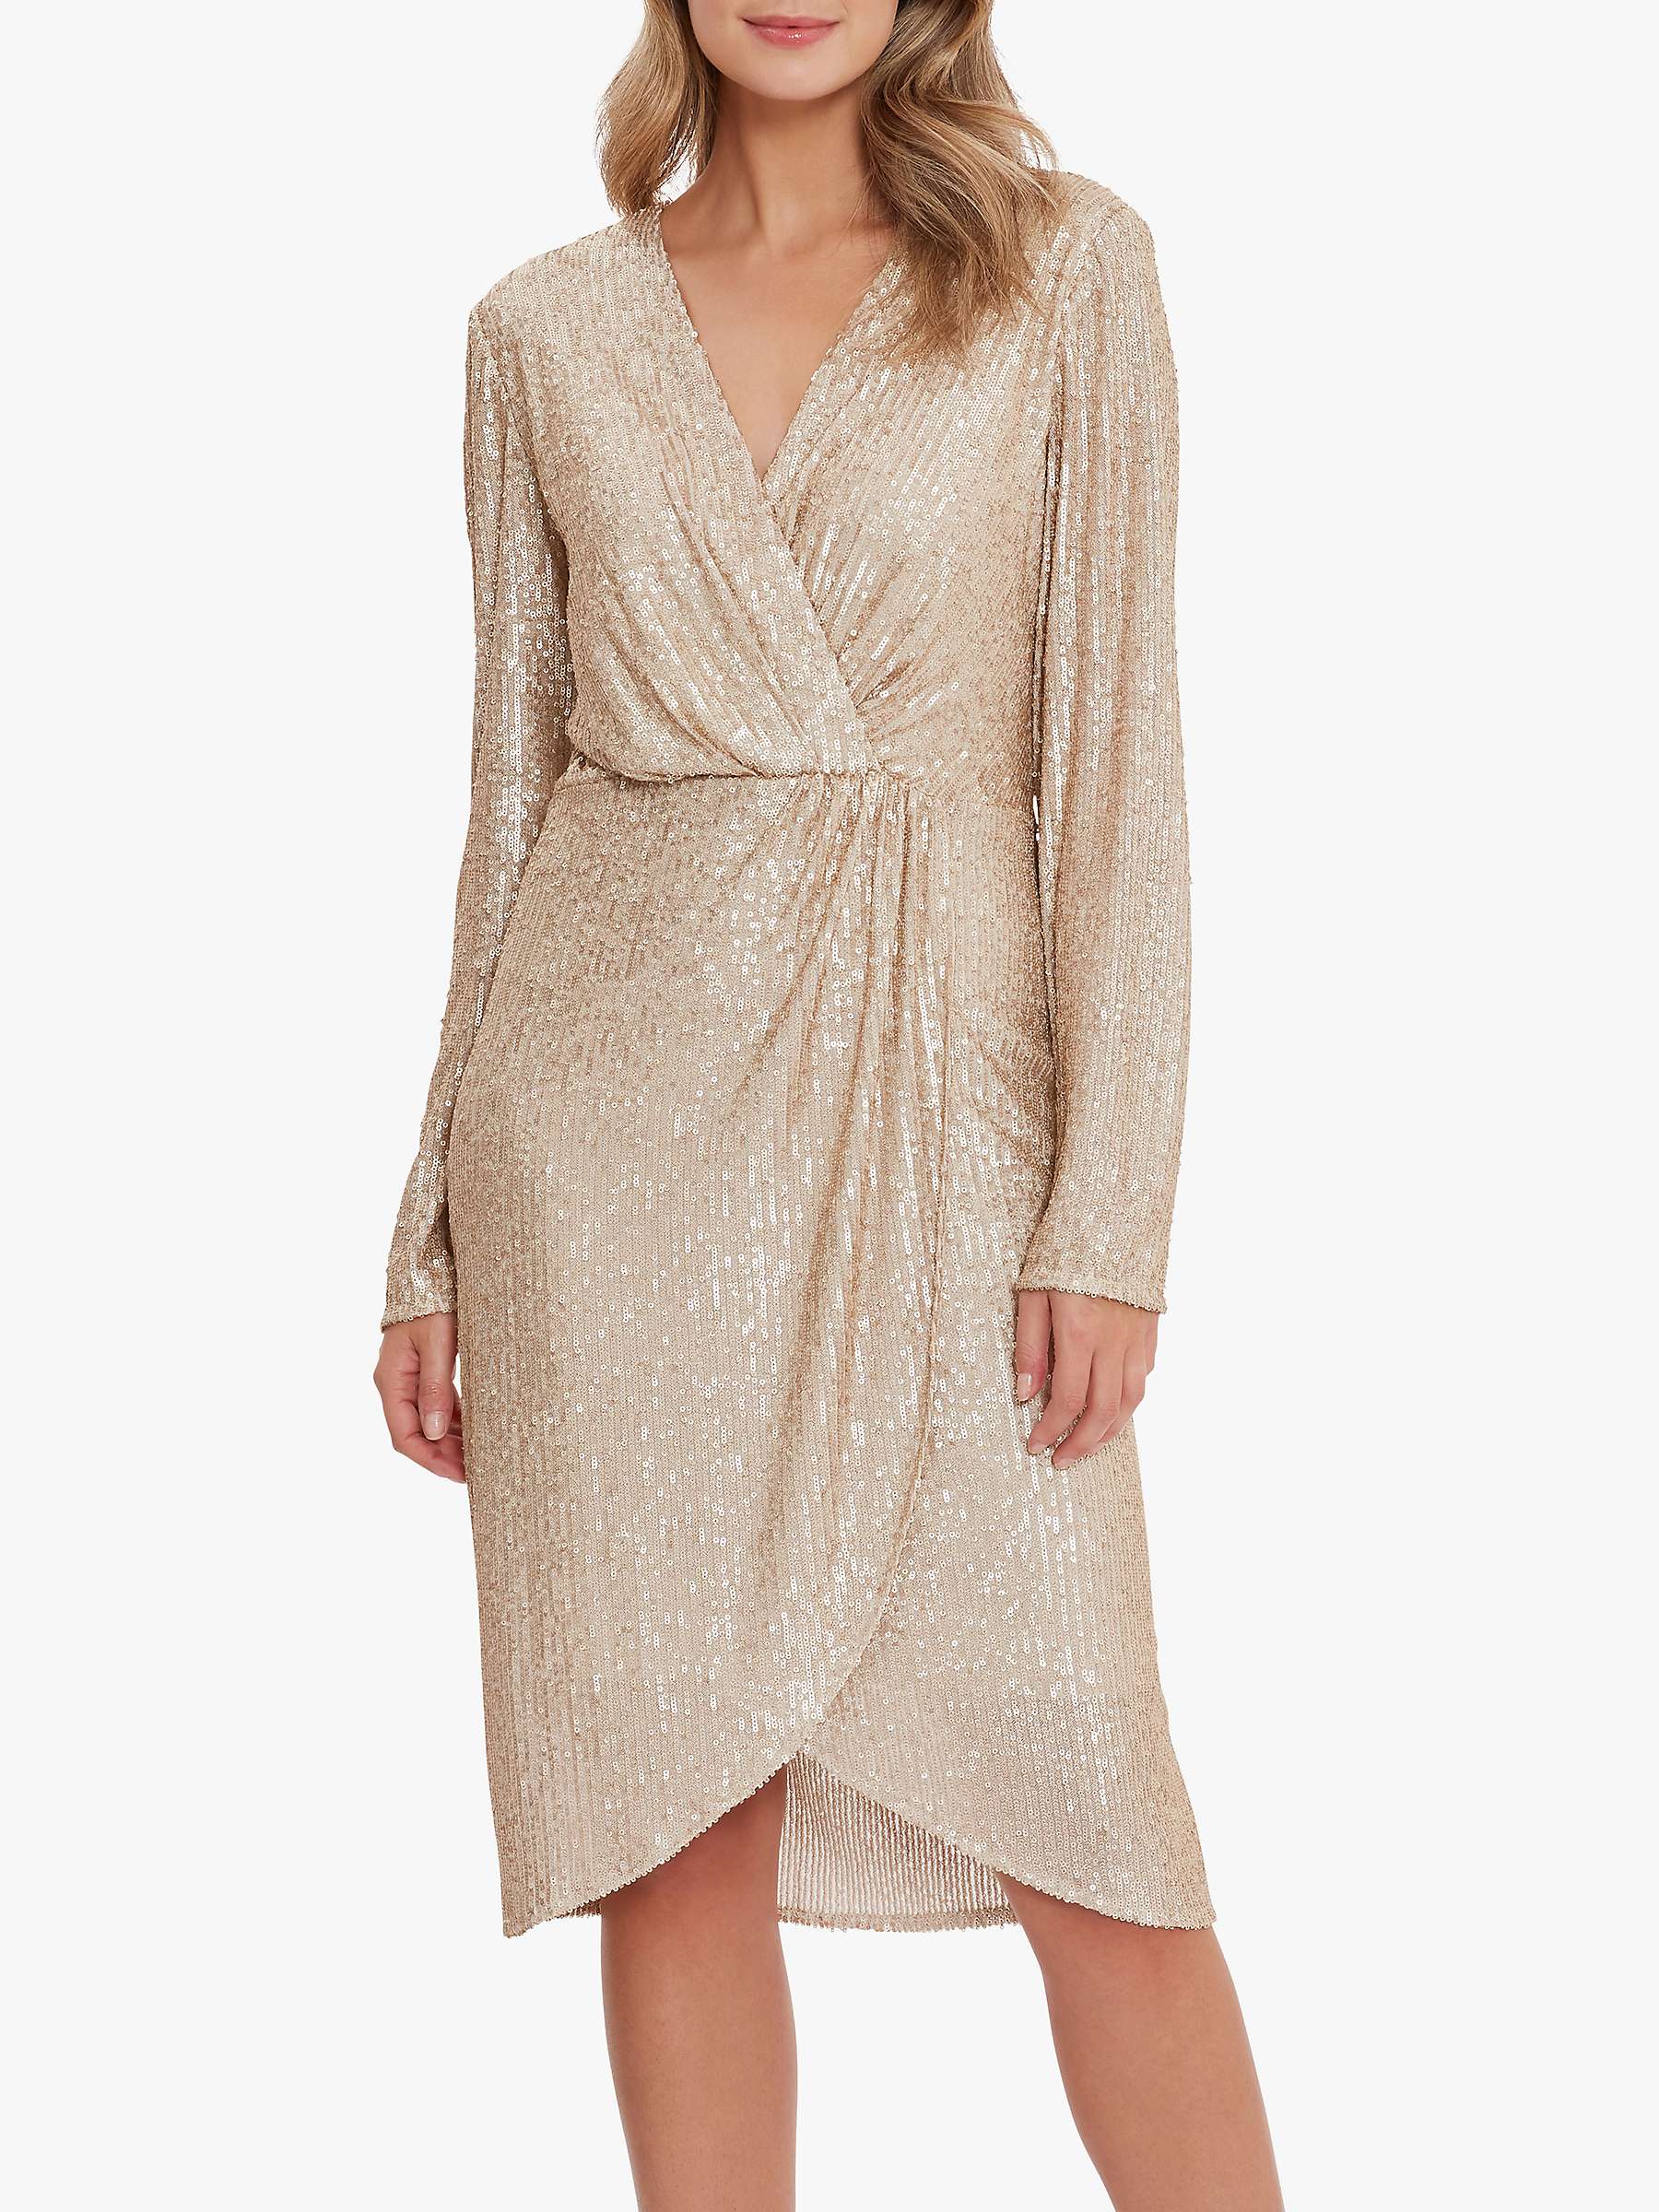 Buy Gina Bacconi Erica Sequin Wrap Dress Online at johnlewis.com